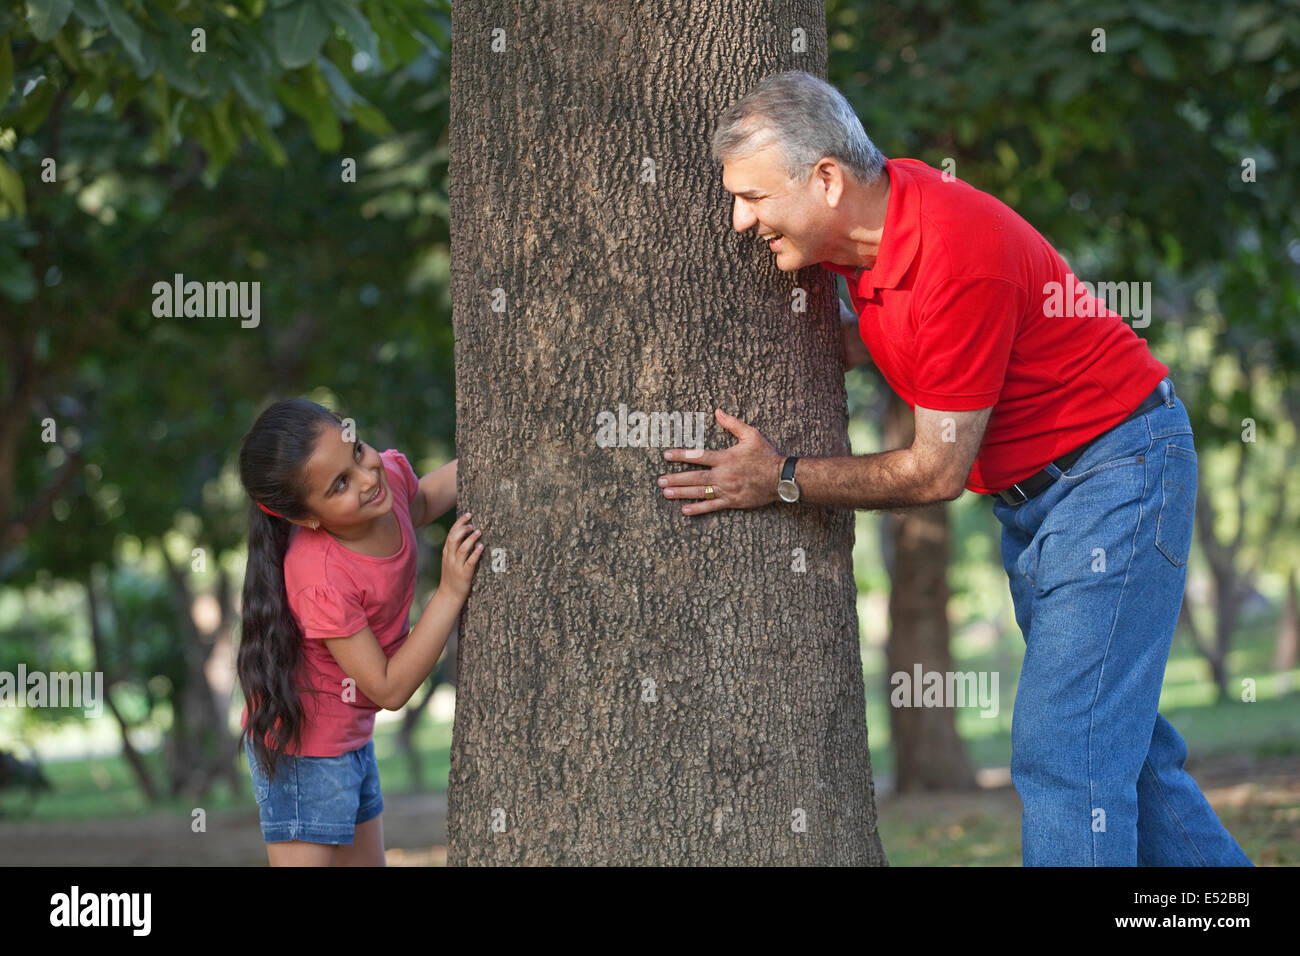 Grandfather and granddaughter playing hide and seek in a park Stock Photo